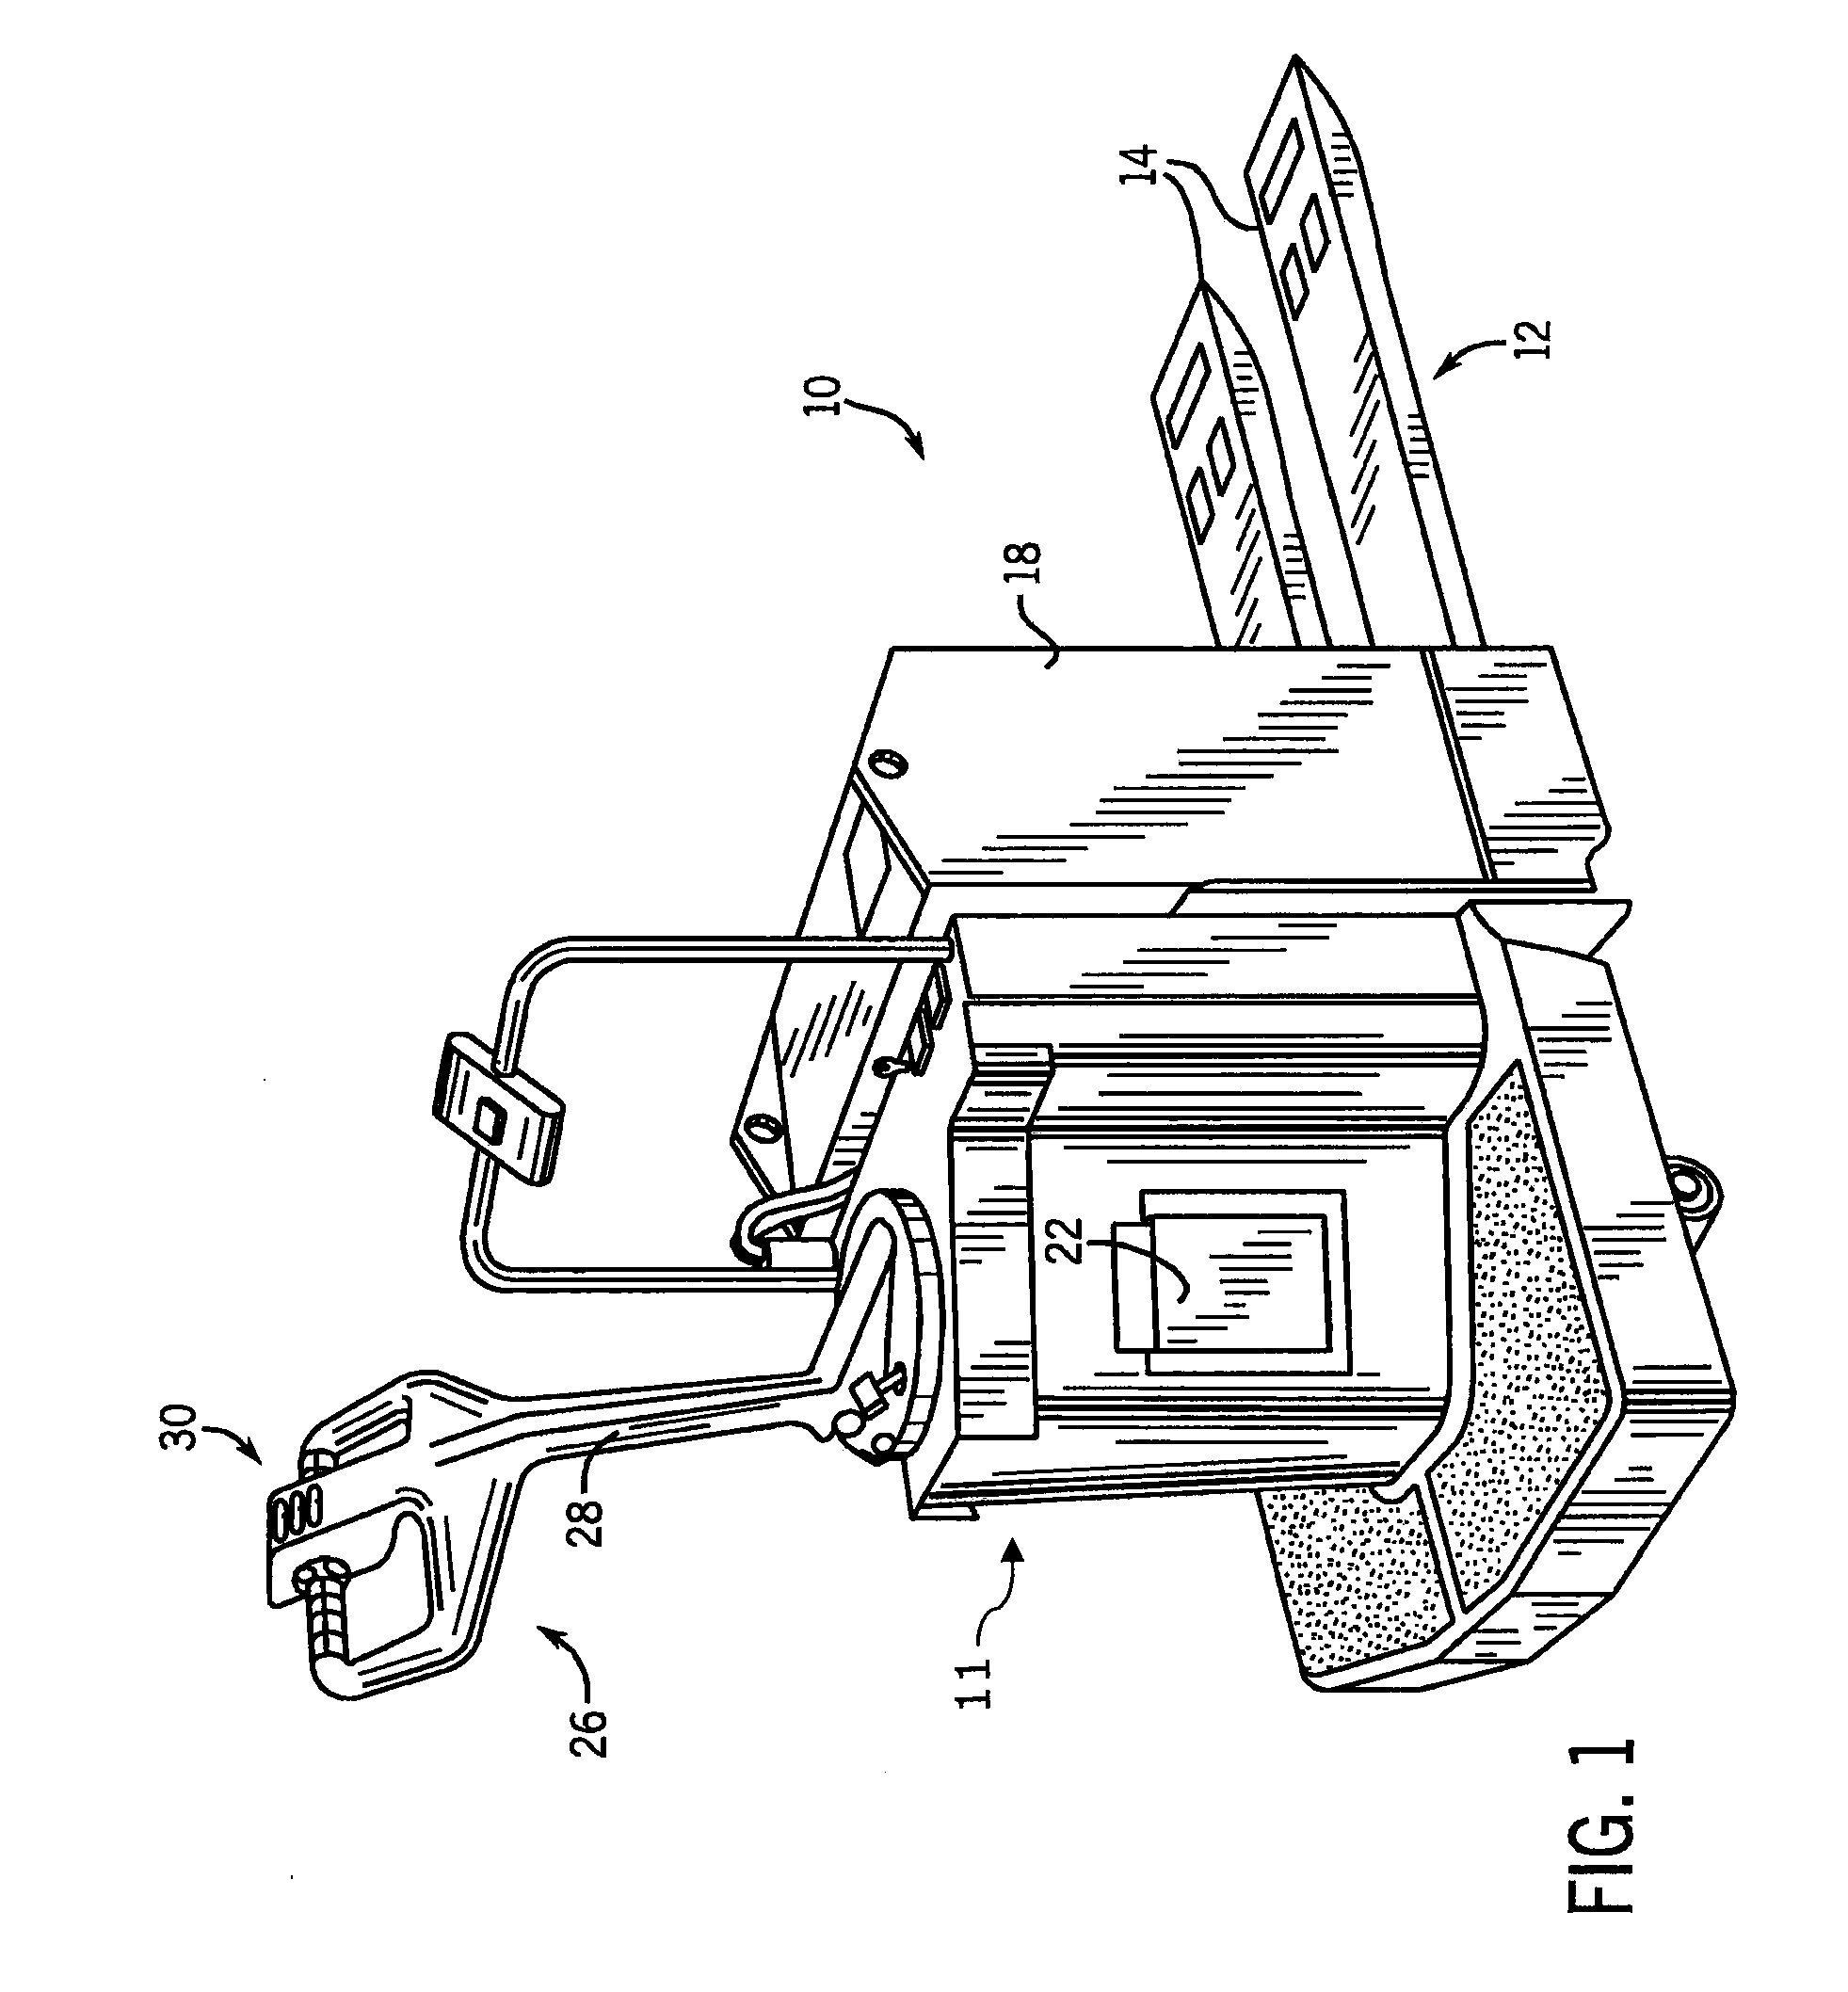 Pallet truck with calculated fork carriage height